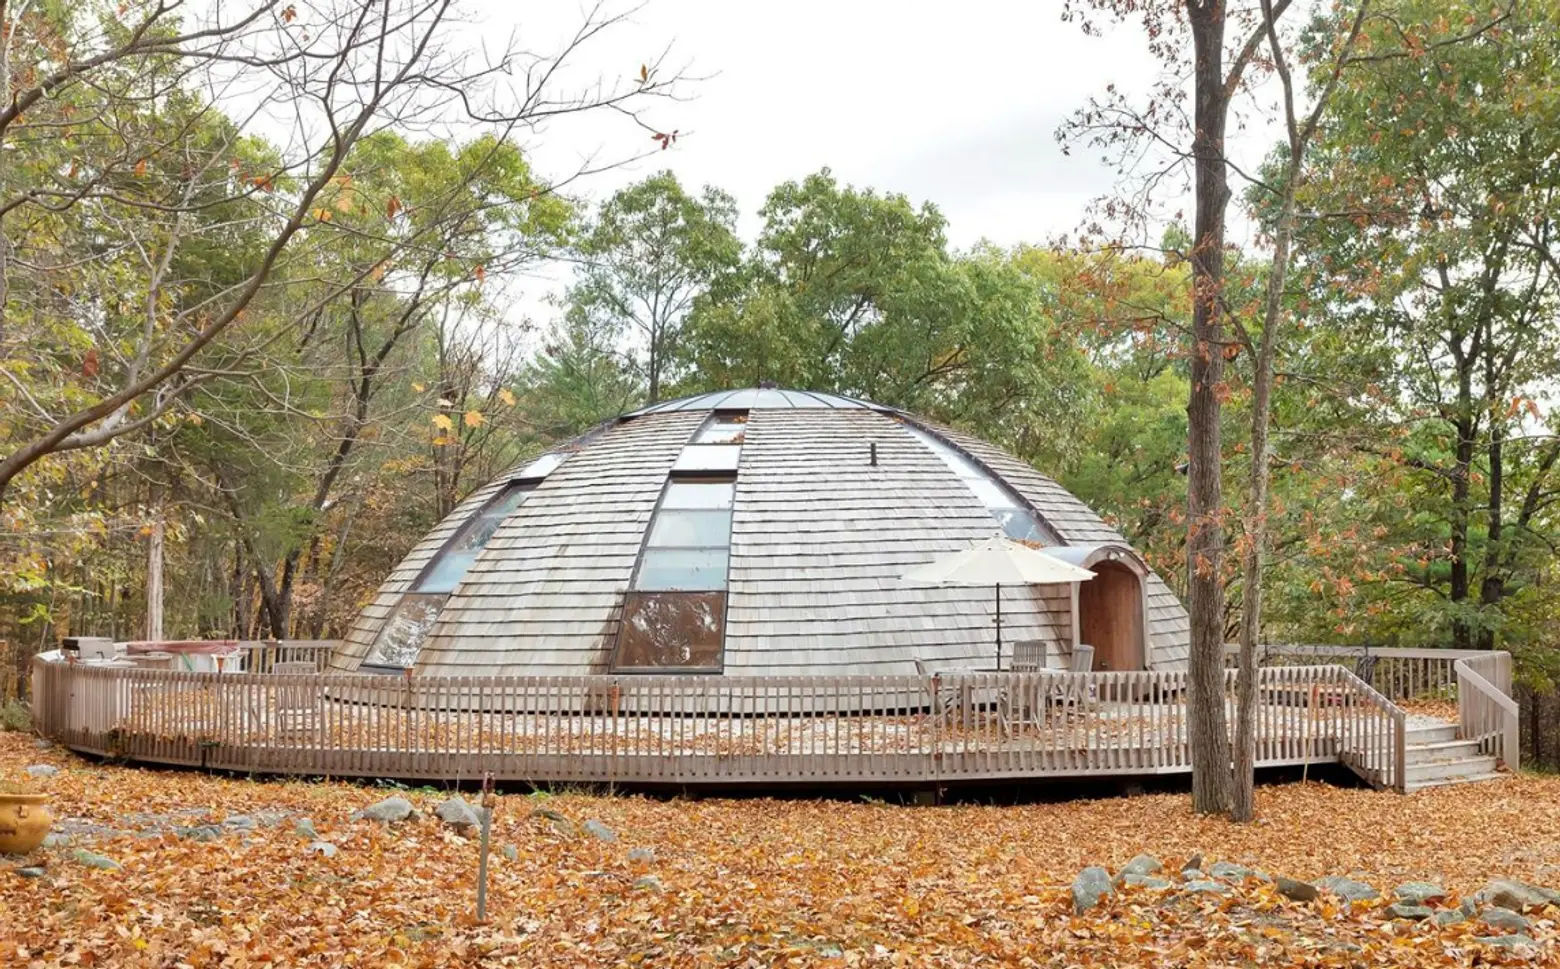 For Under $1M You Can Buy a Dome Home in New Paltz That Rotates 360 Degrees